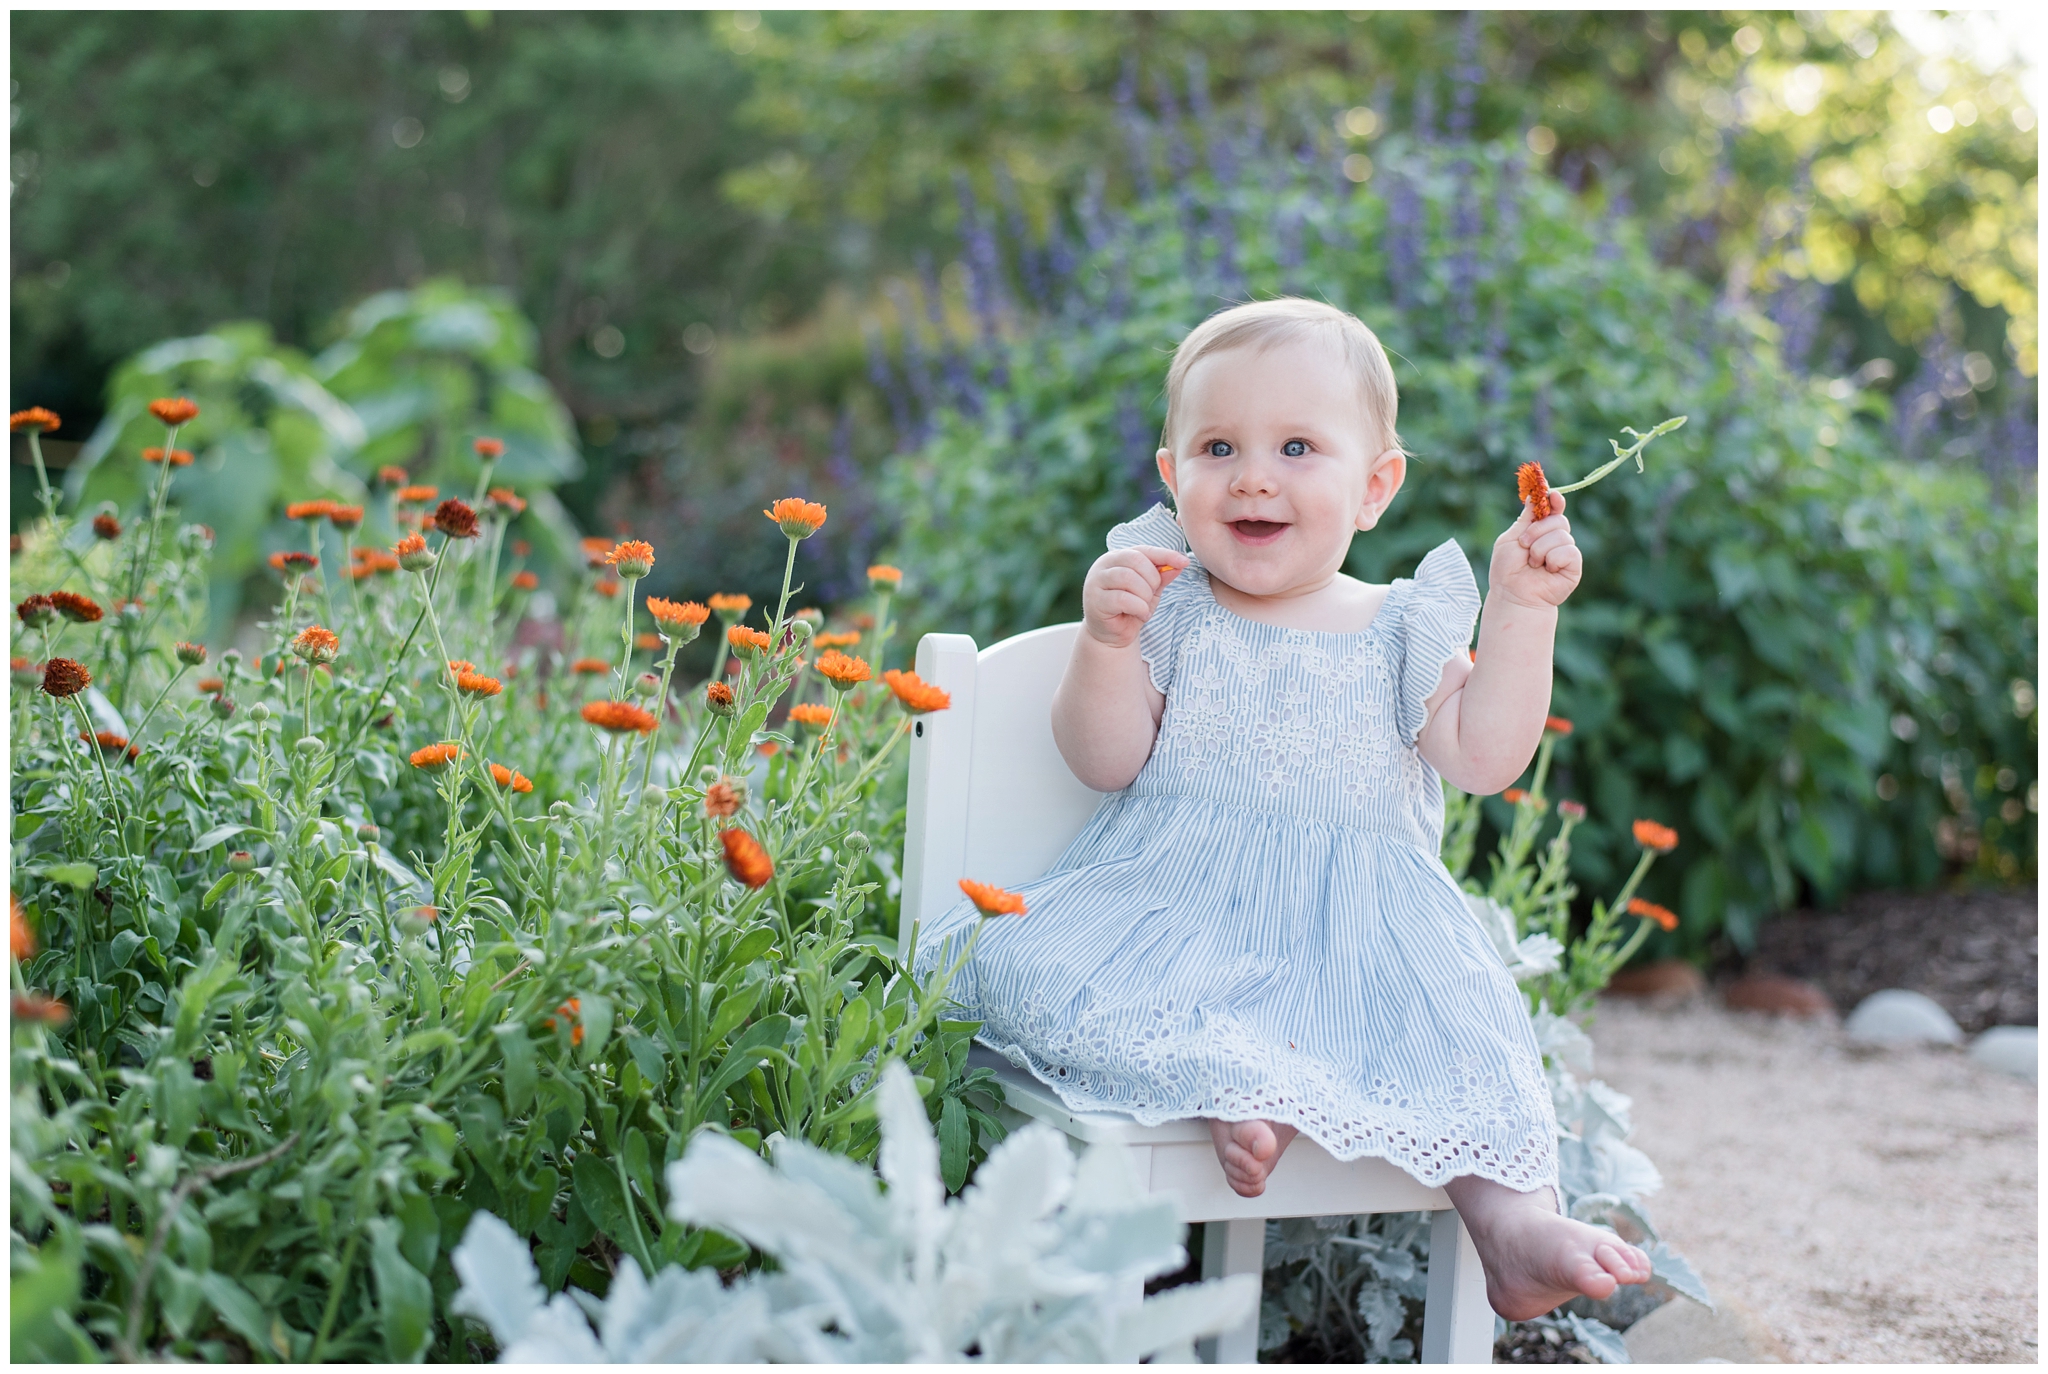 Kingwood child photographer session with 9 month old baby girl in spring garden